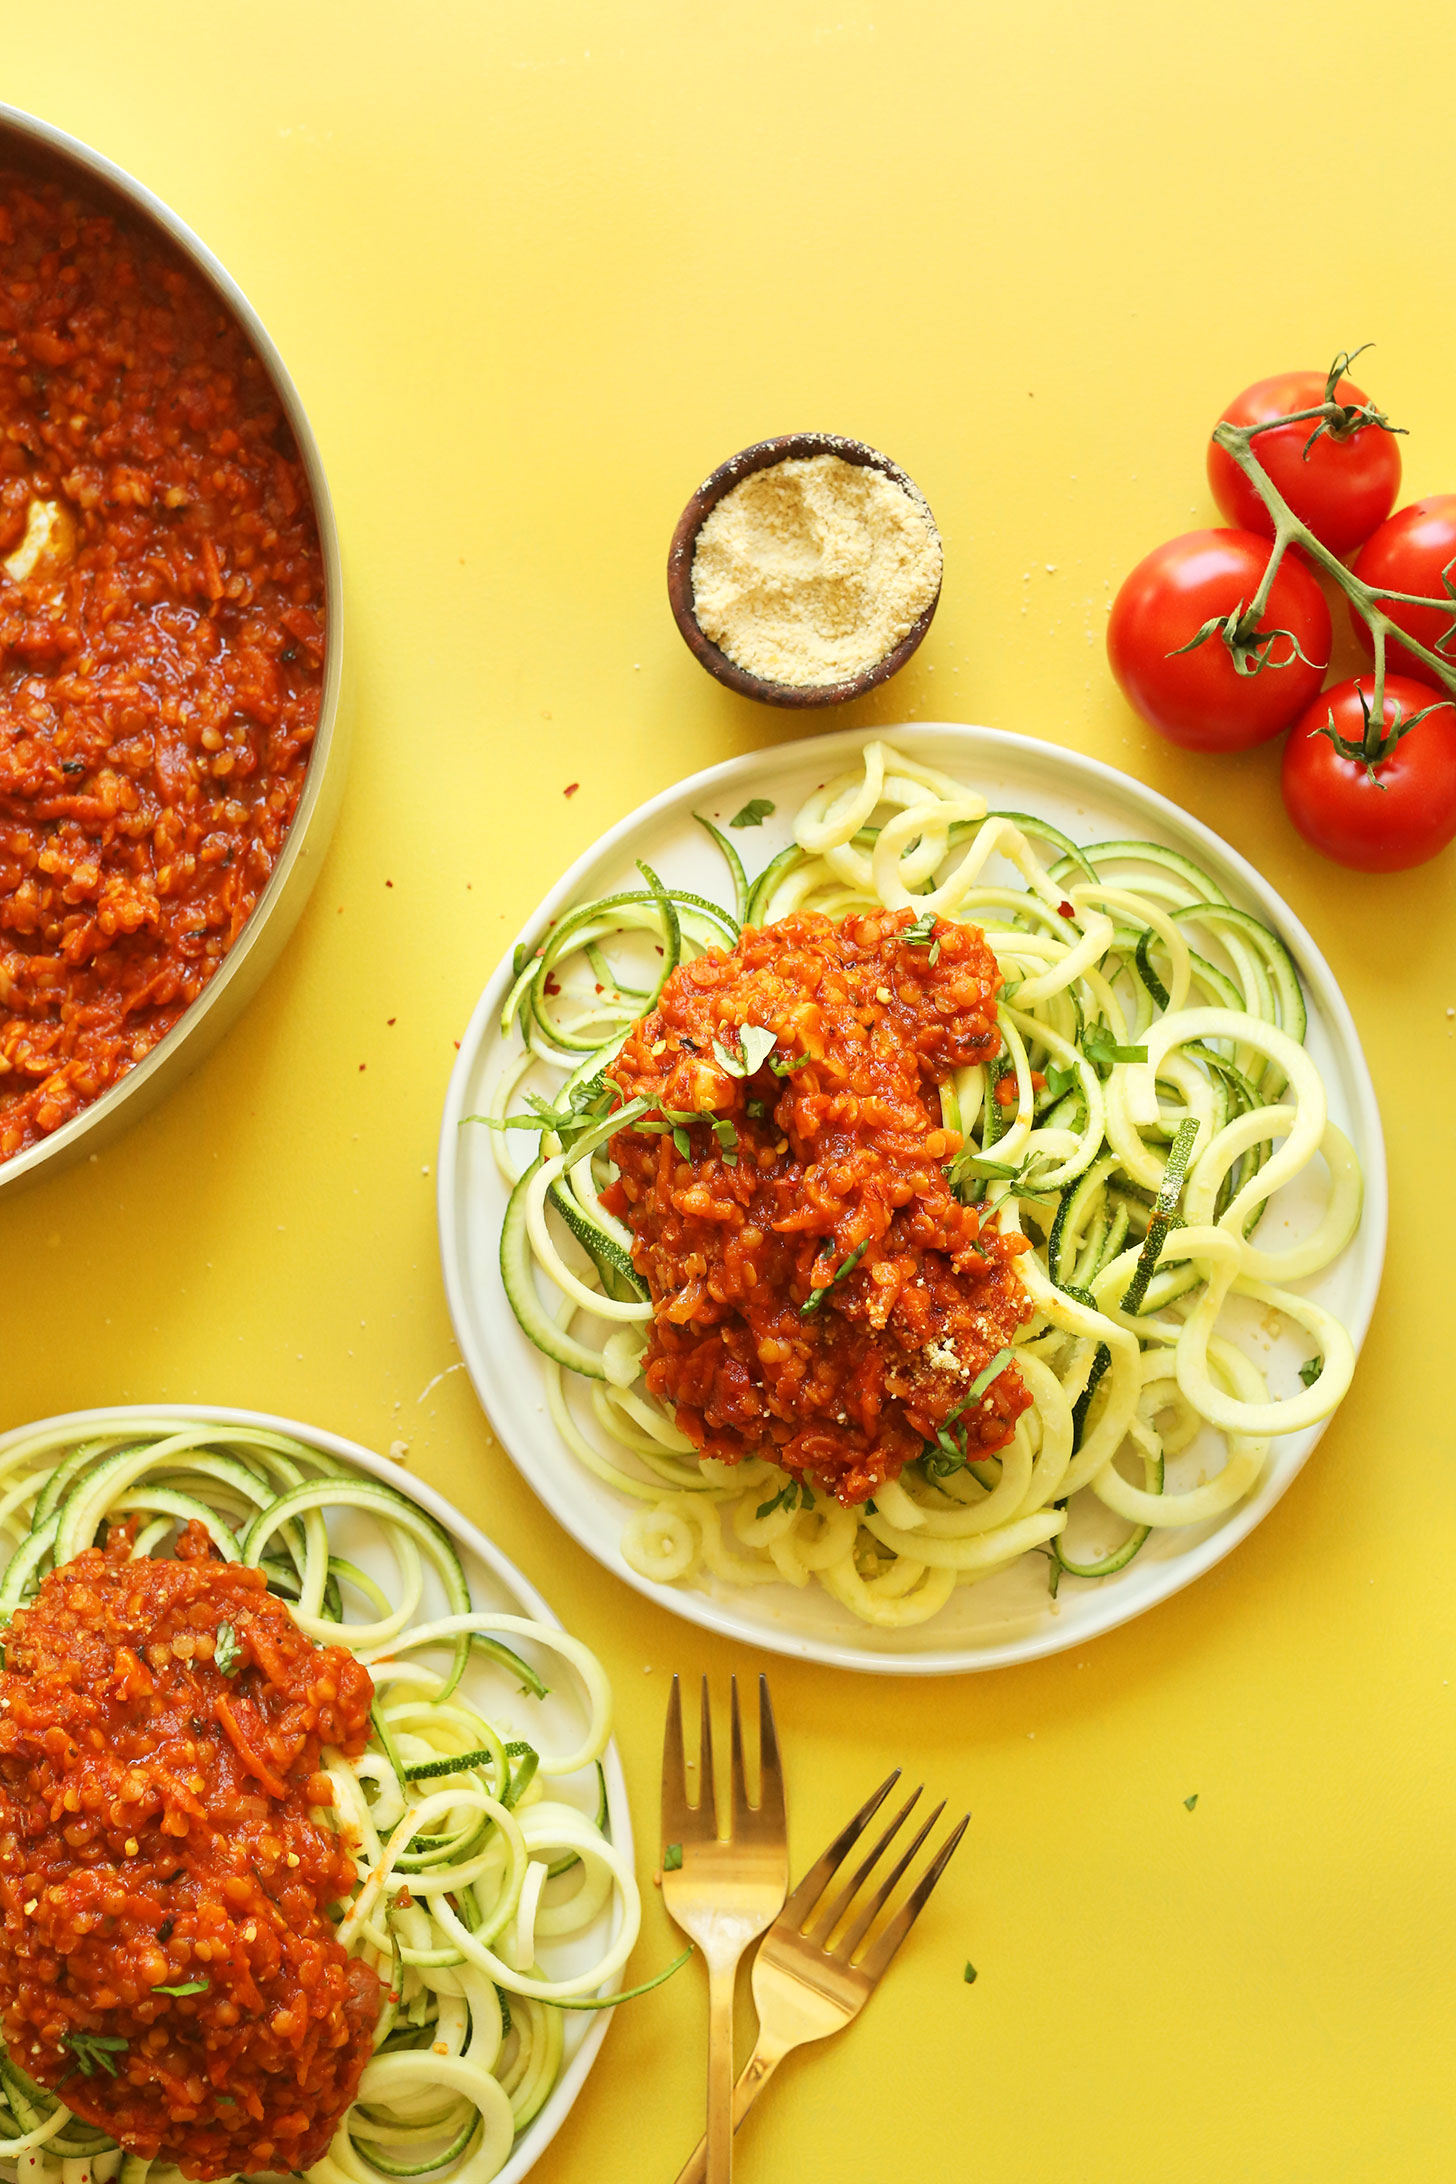 Zucchini Pasta with Lentil Bolognese